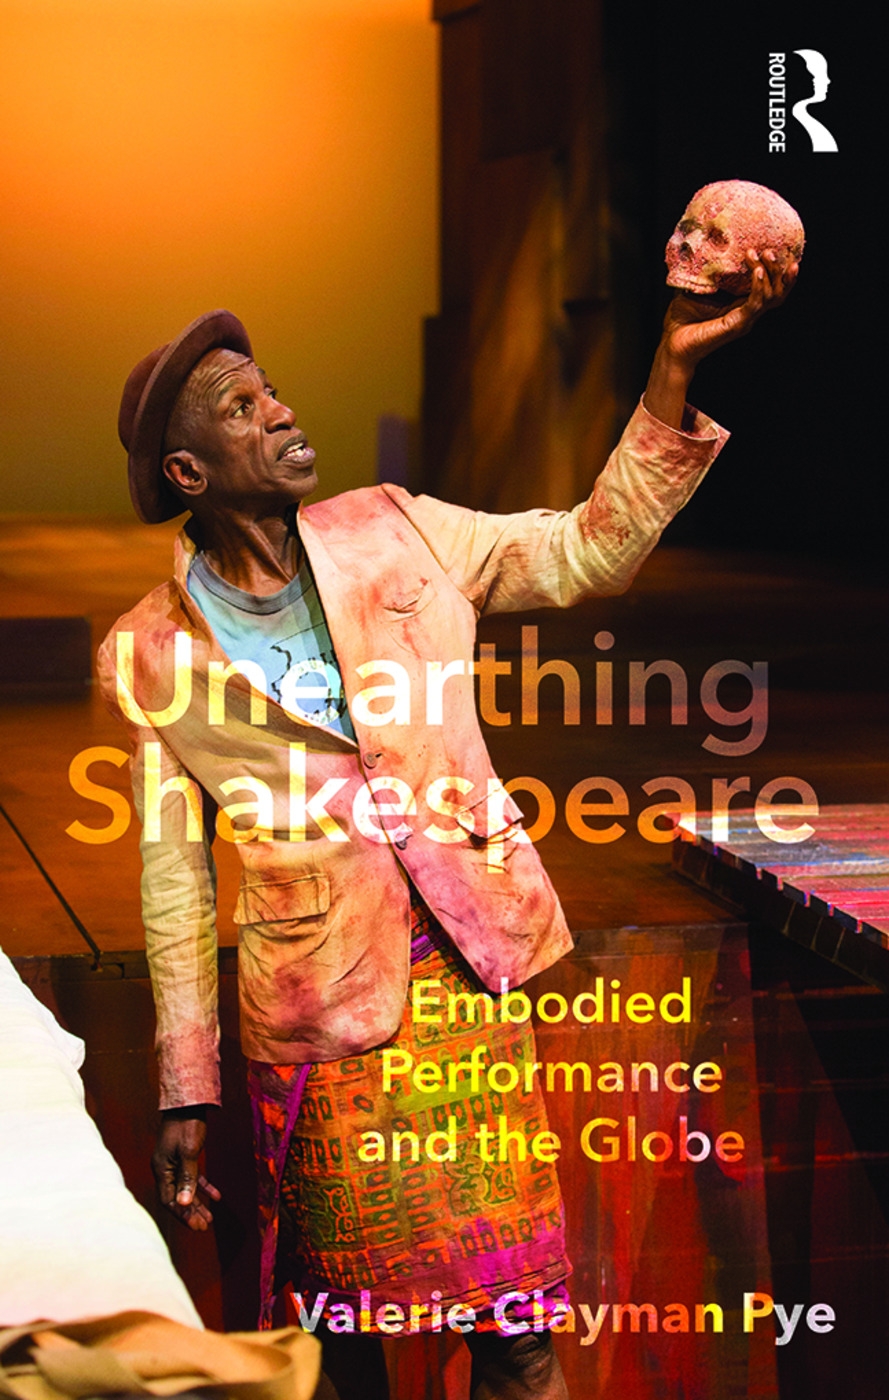 Unearthing Shakespeare: Embodied Performance and the Globe